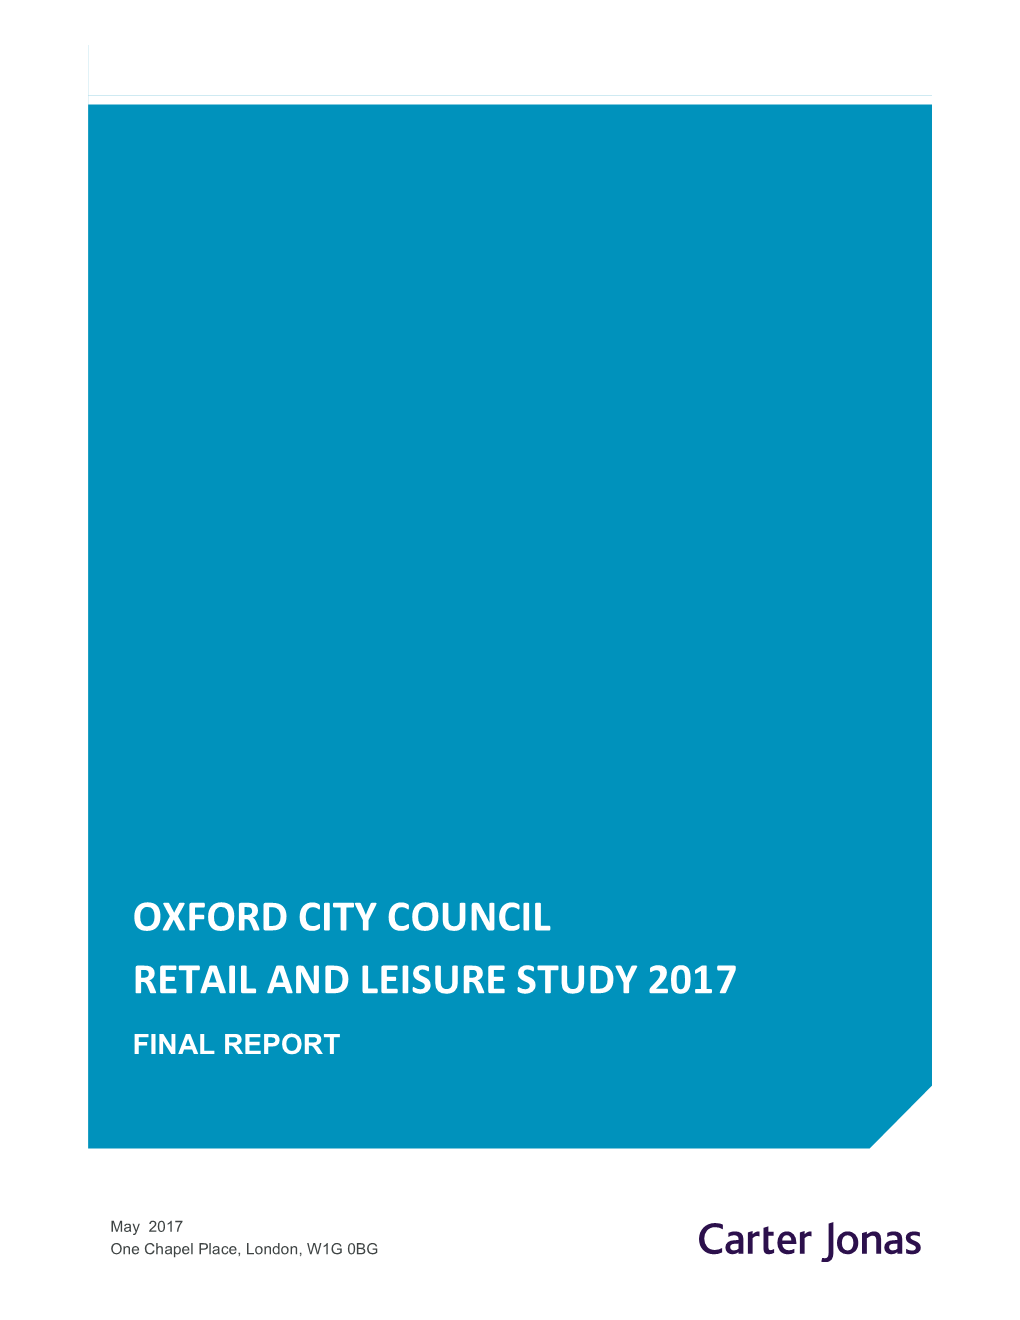 Oxford City Council Retail and Leisure Study 2017